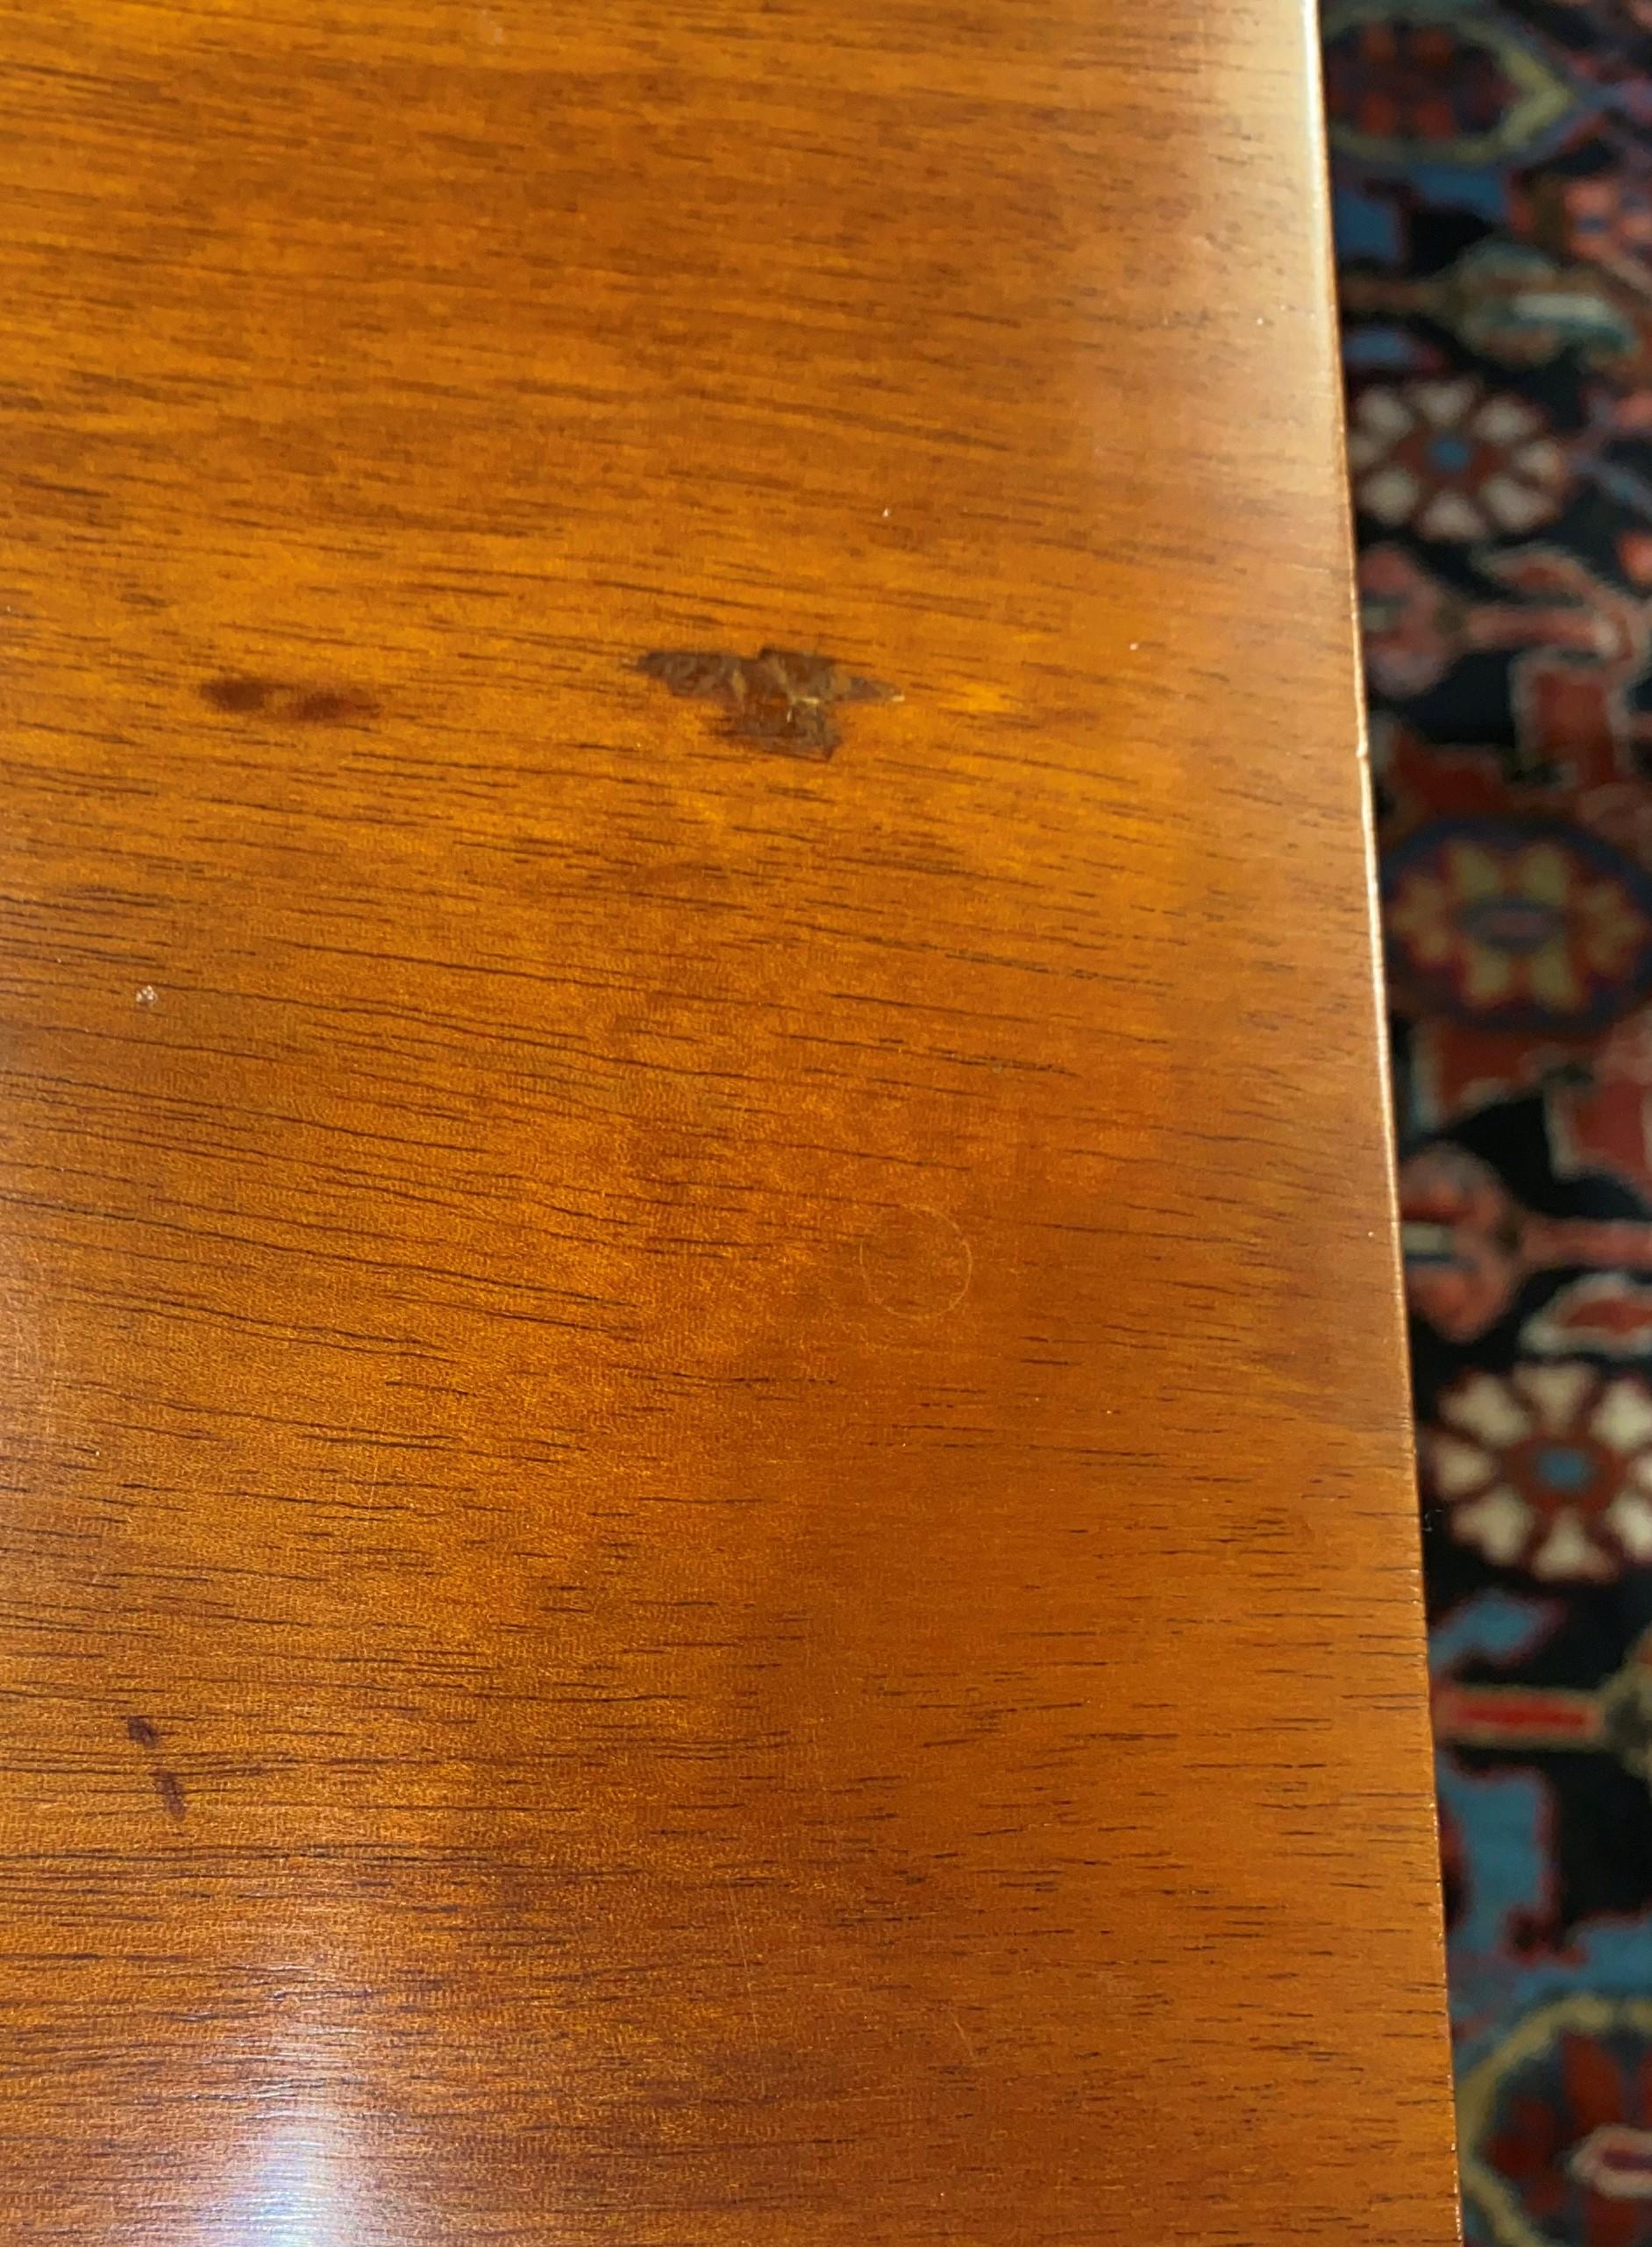 19th c Federal Mahogany Dining Table with “D” Ends & Center Dropleaf 7